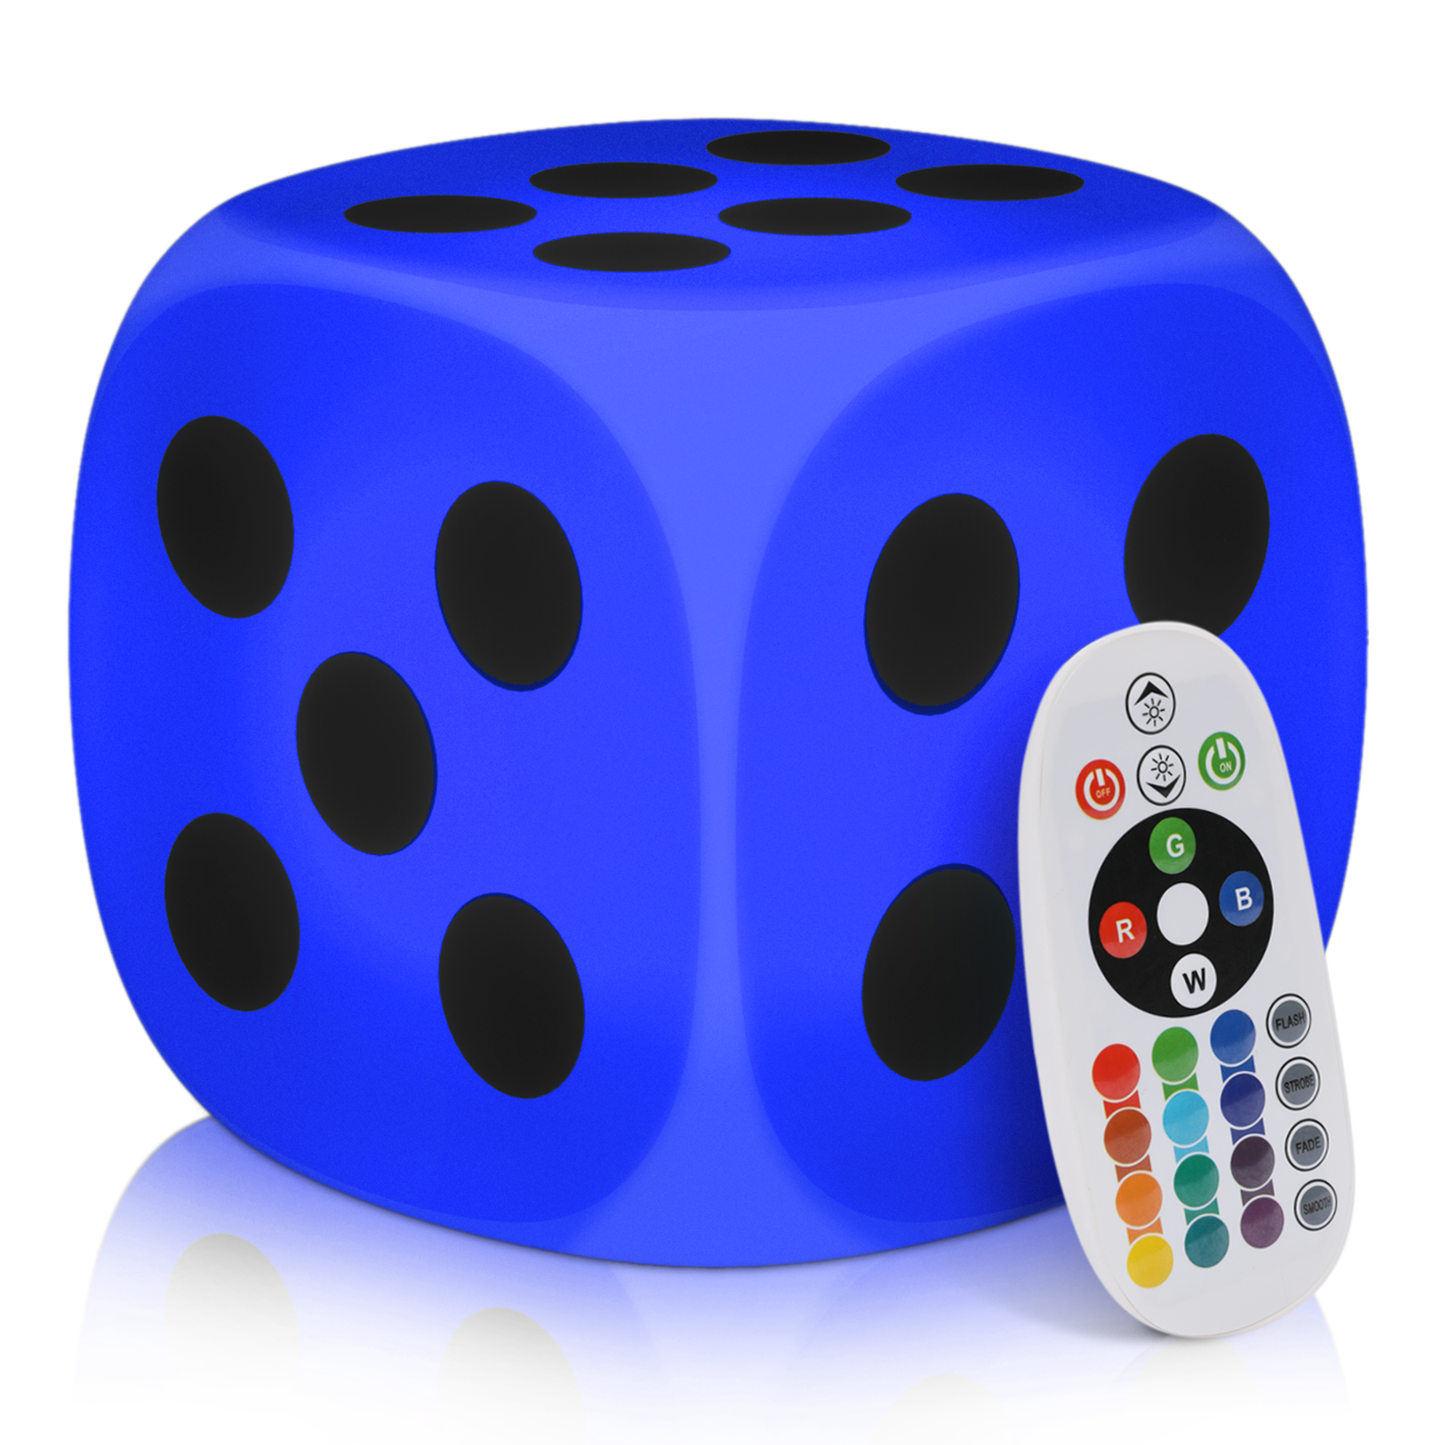 LED - Stool - Dice Cube - 16 Colors Remote Control